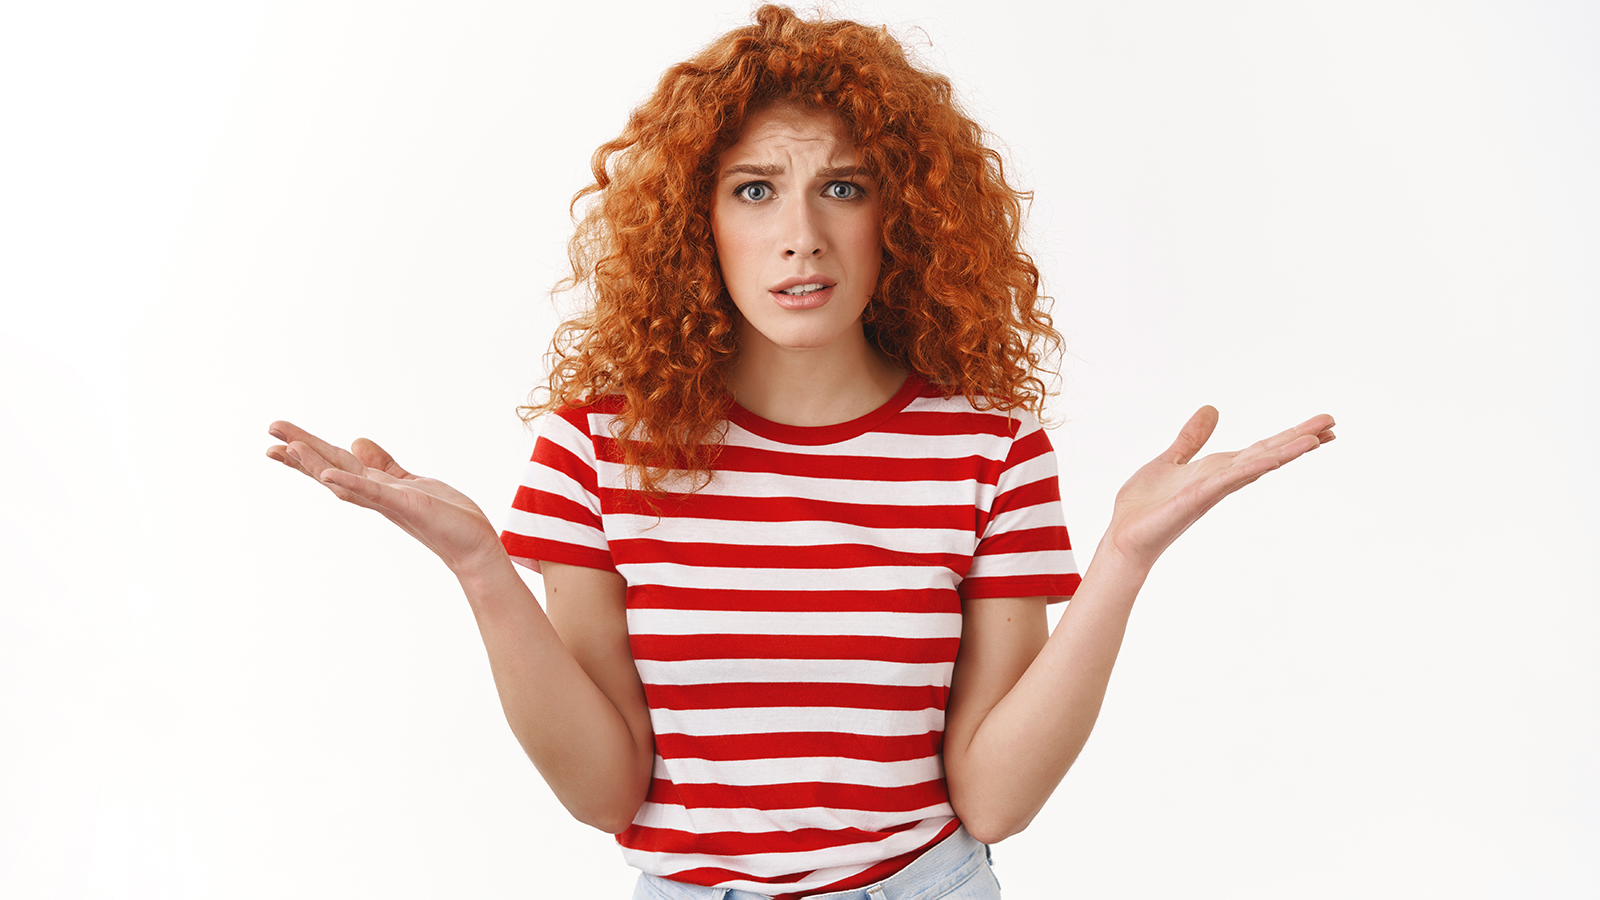 What wrong you. Redhead curly-haired young freak out complaining woman arguing shrugging dismay raise hands sideways puzzled questioned cringing bothered standing white background